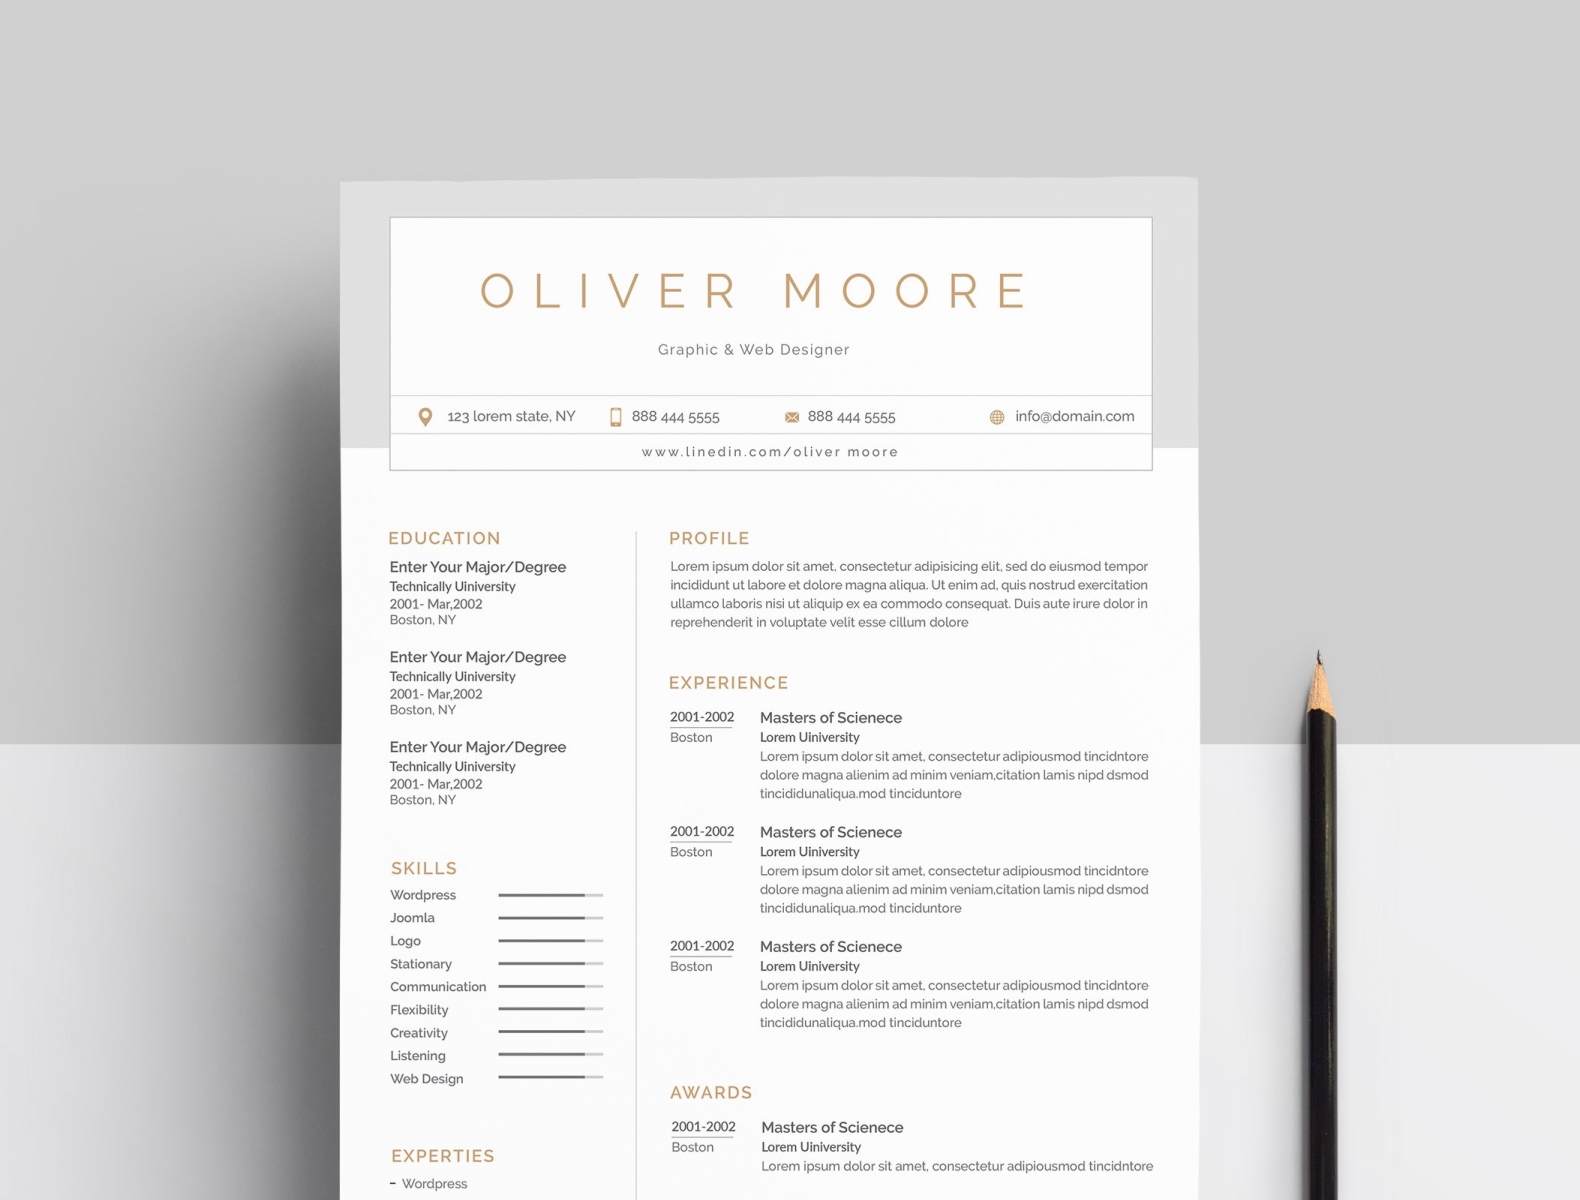 cool resume templates 2017